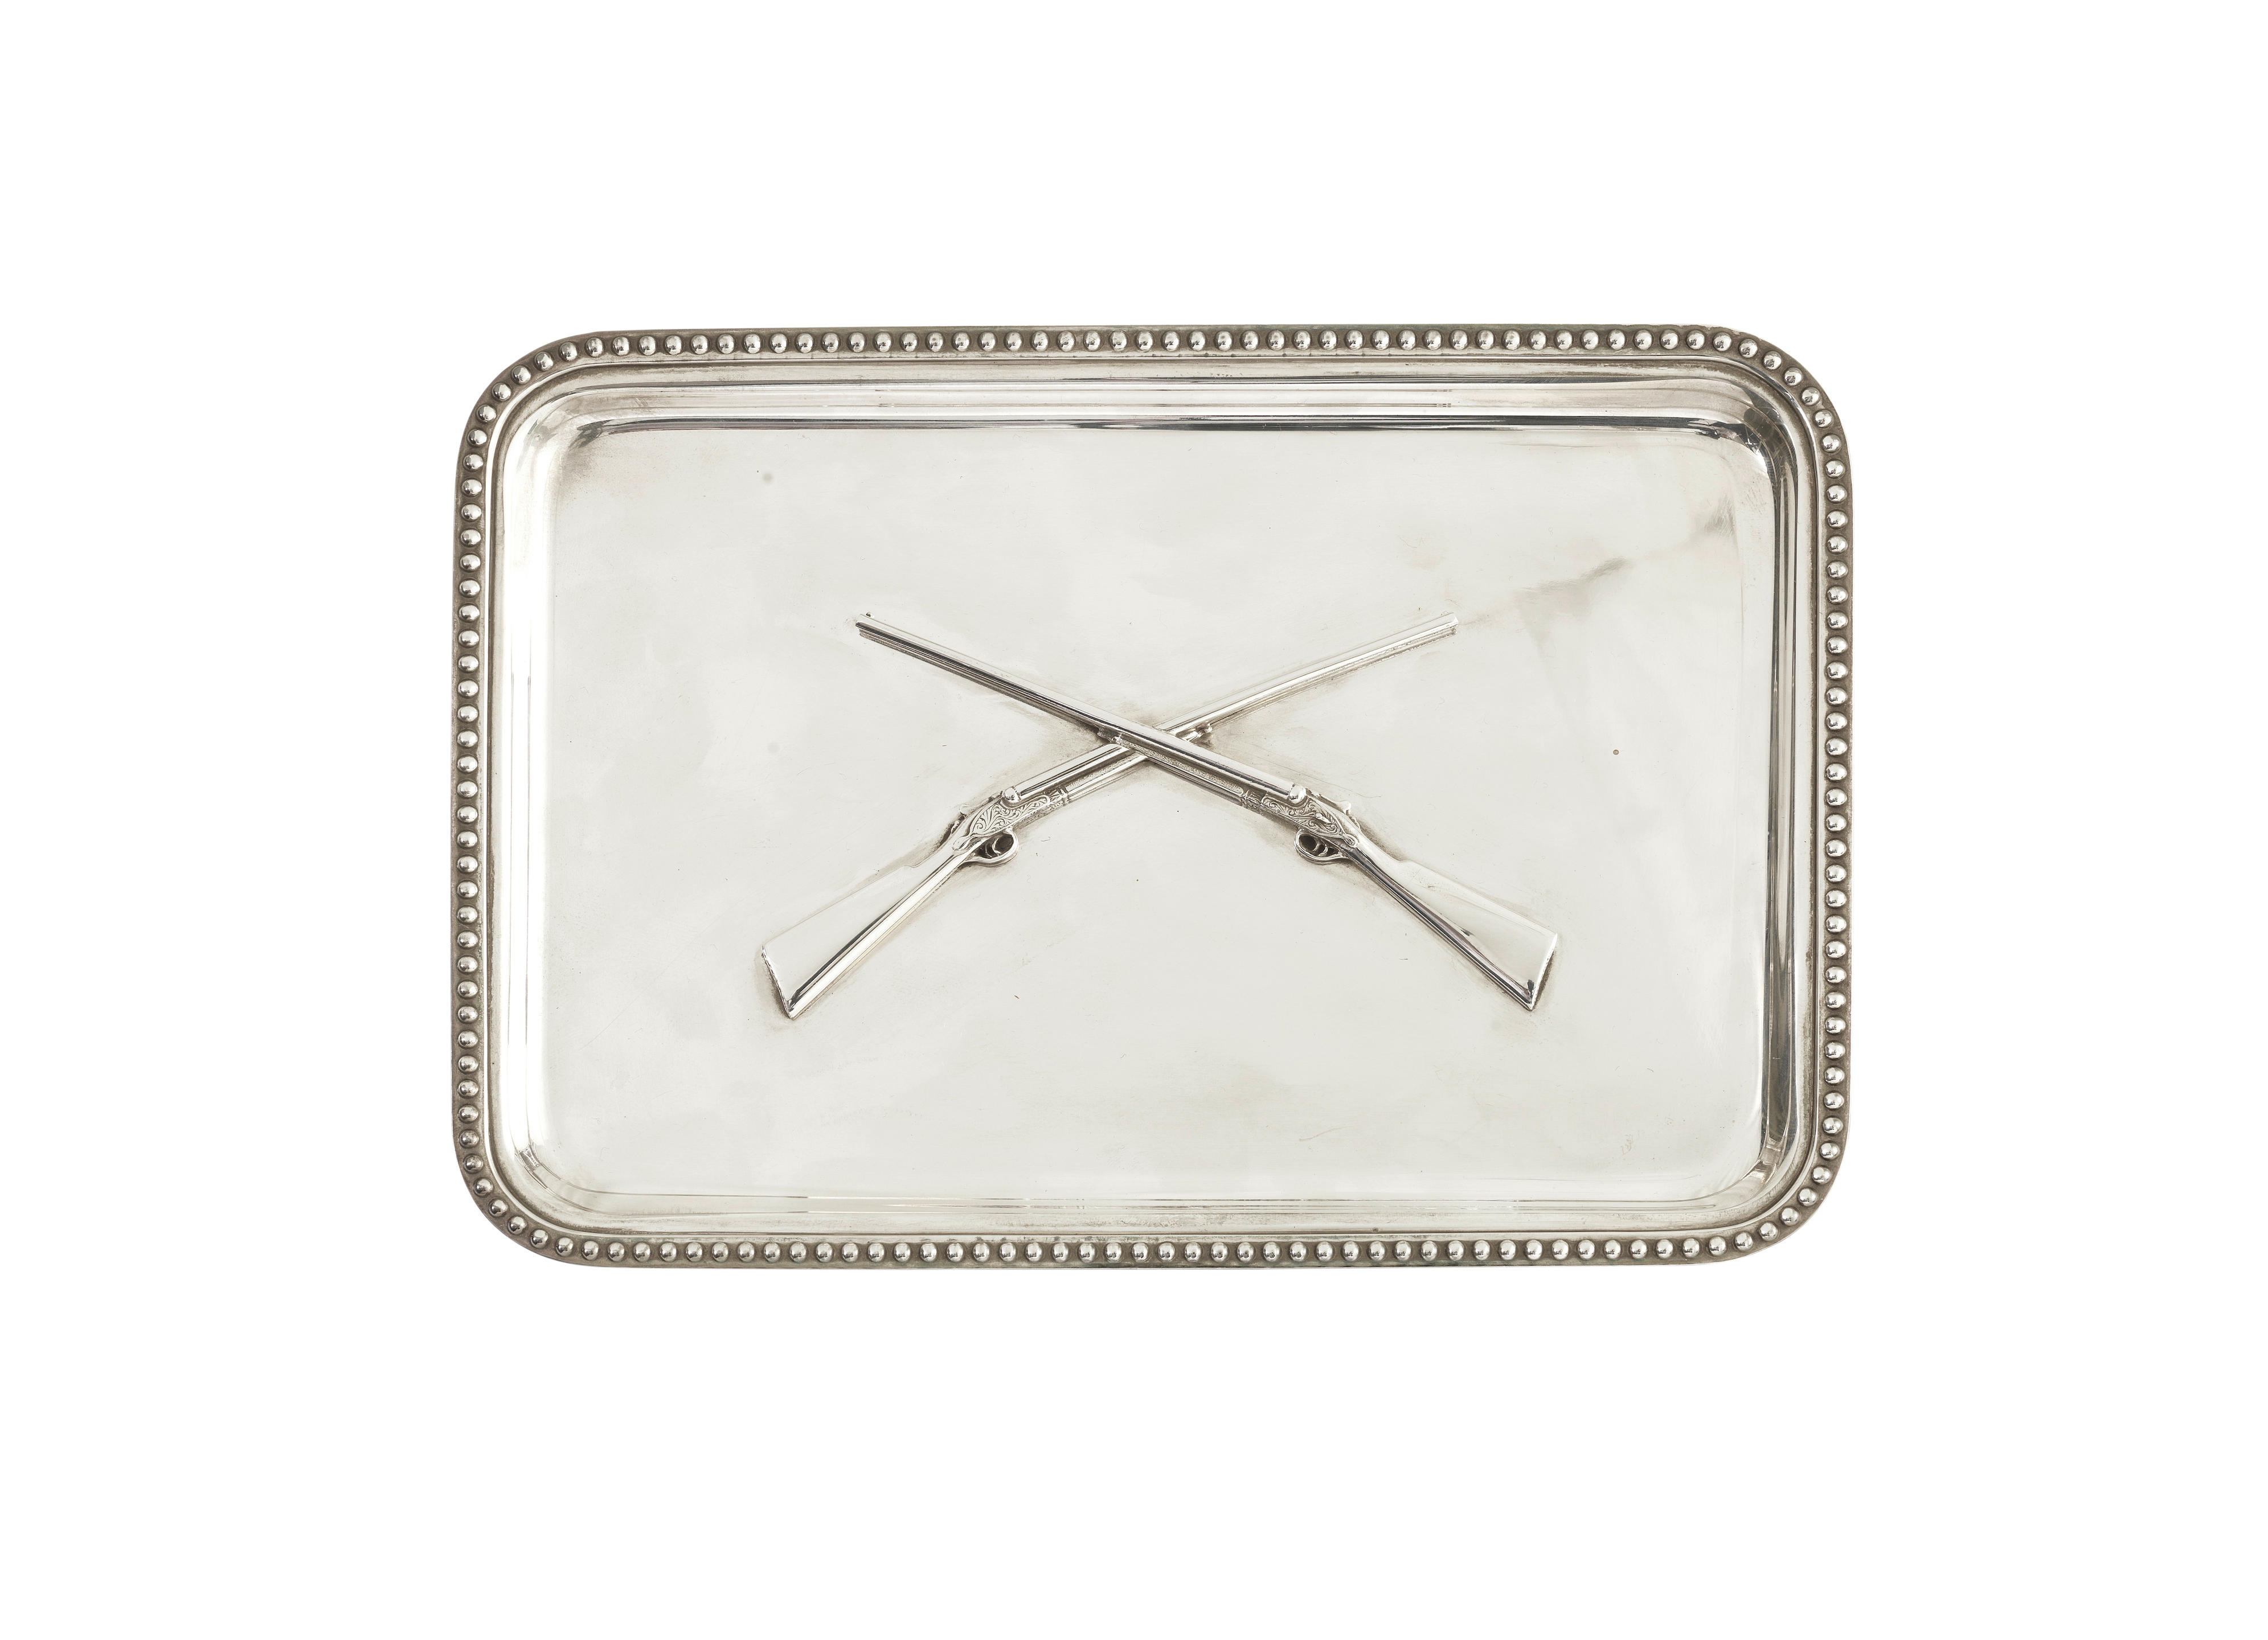 A silver ashtray by Holland & Holland